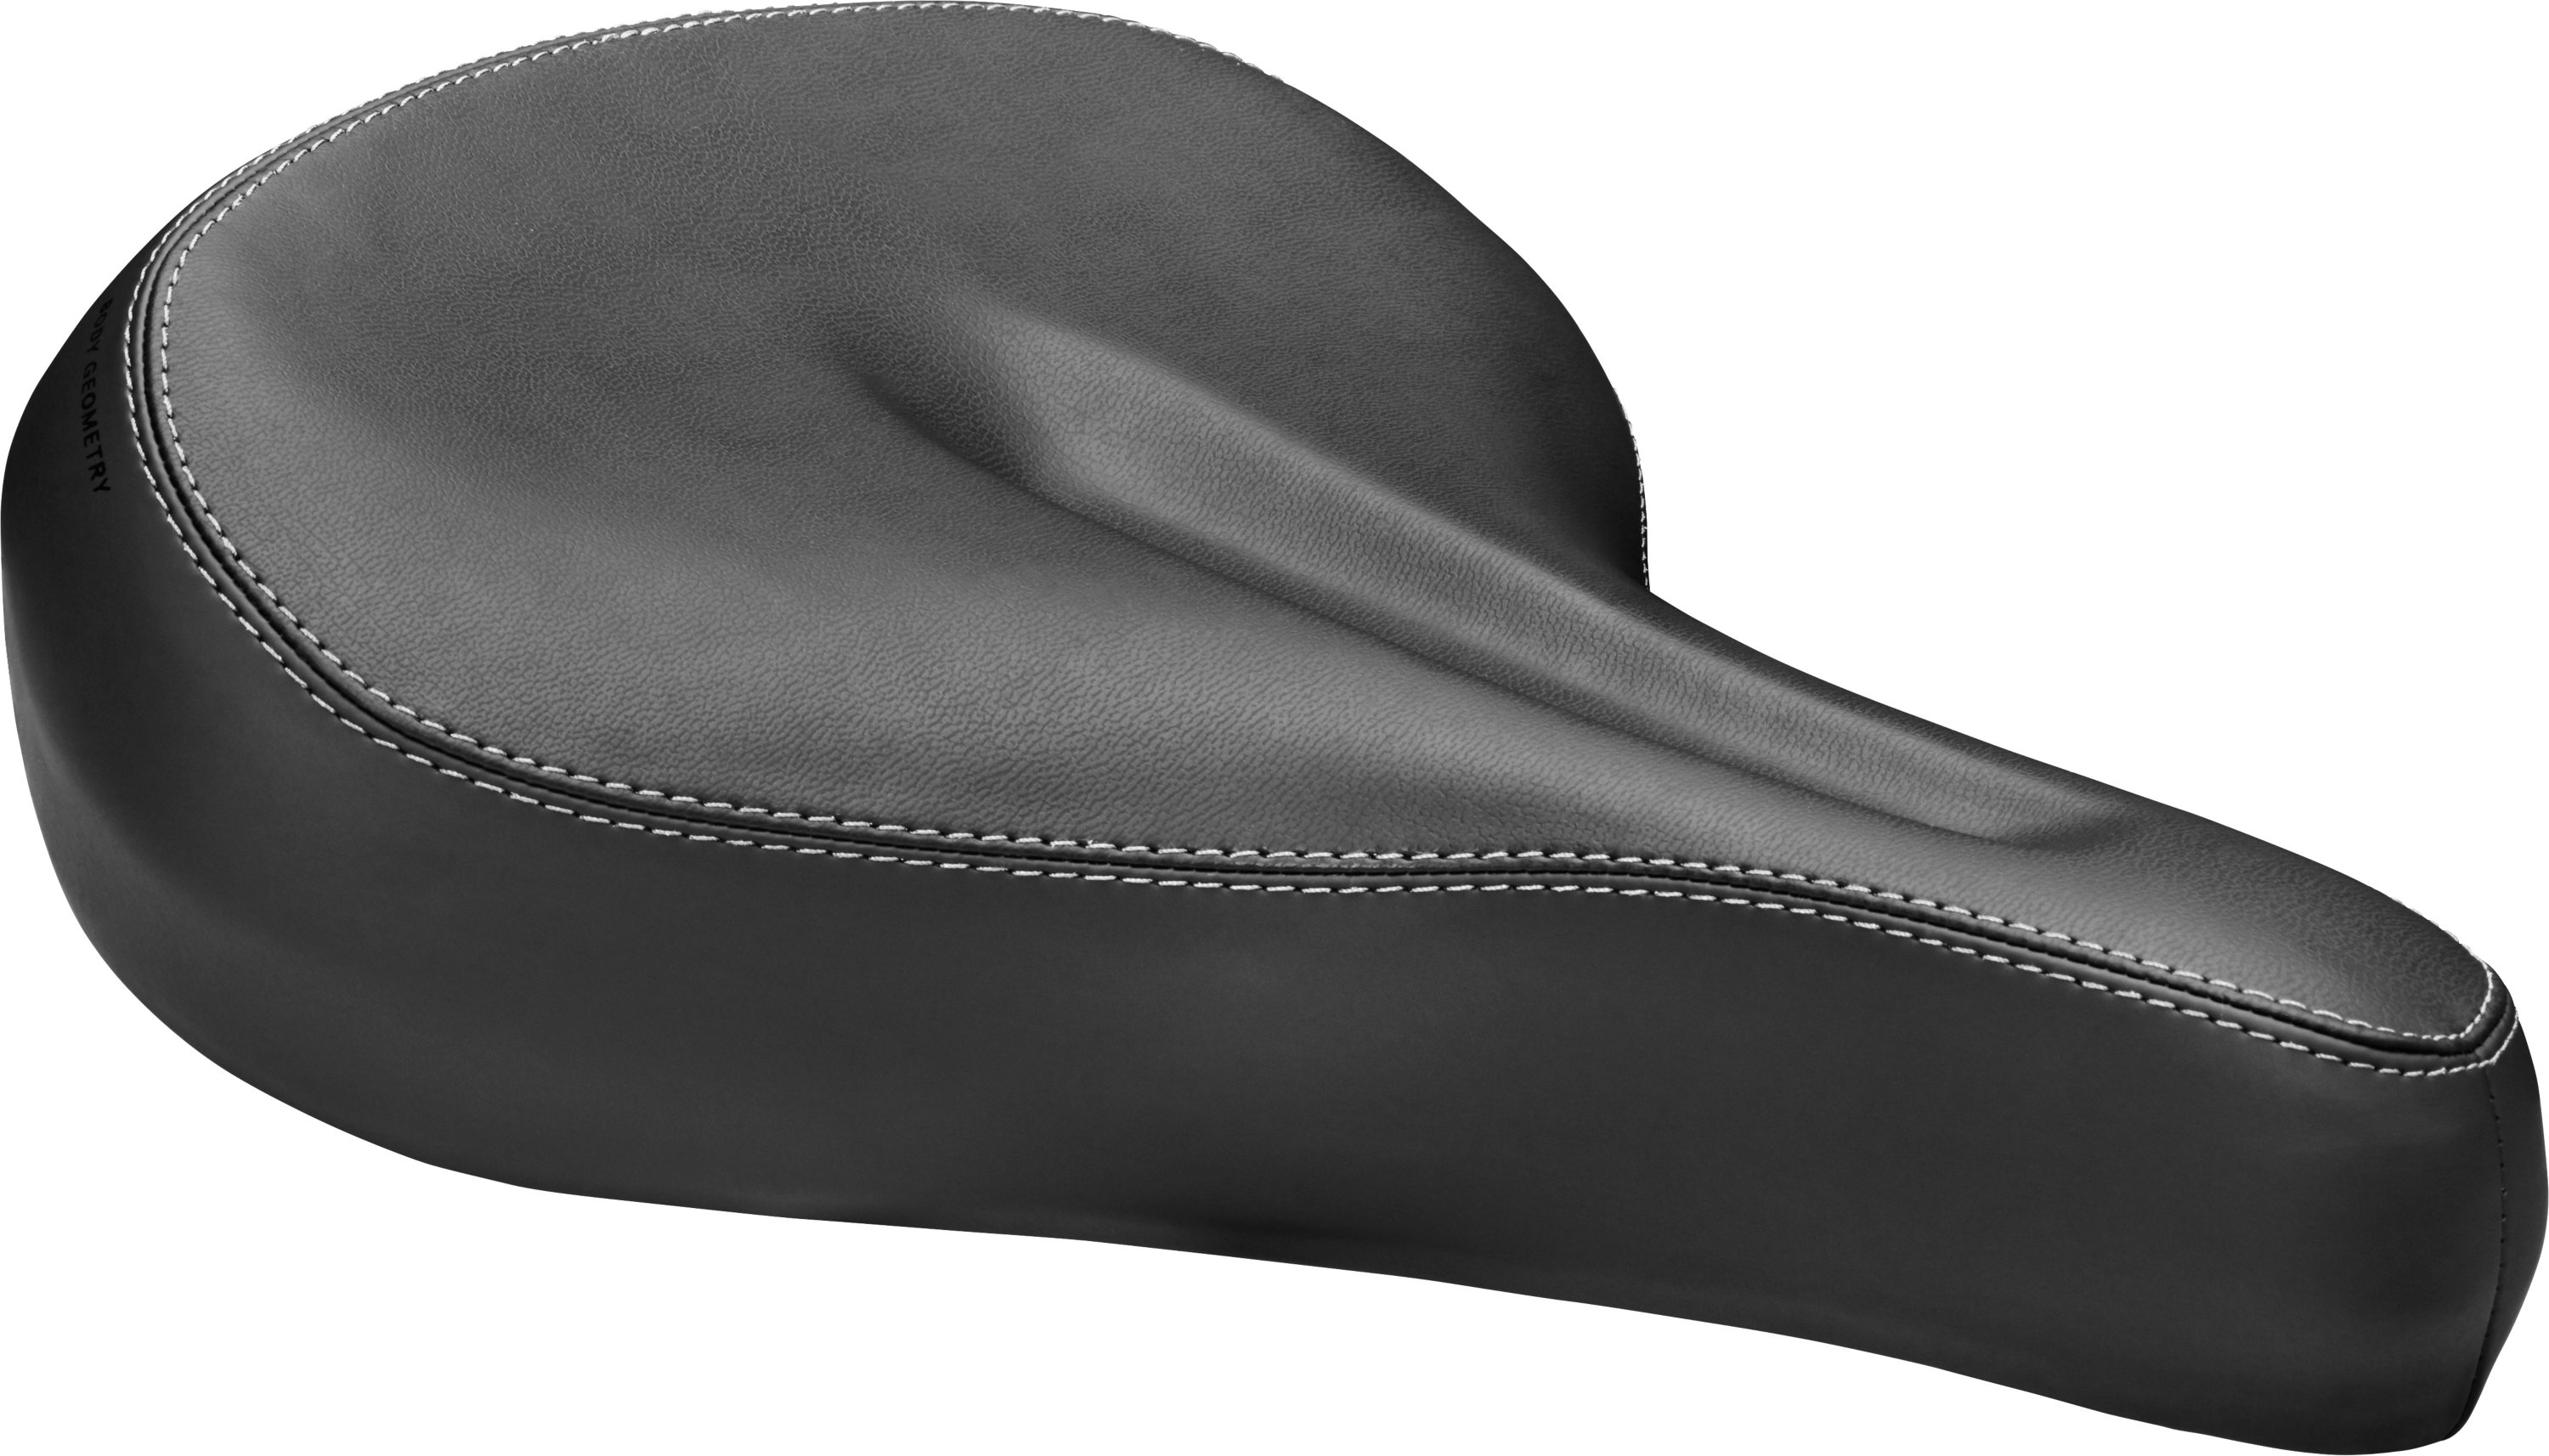 specialized cup saddle